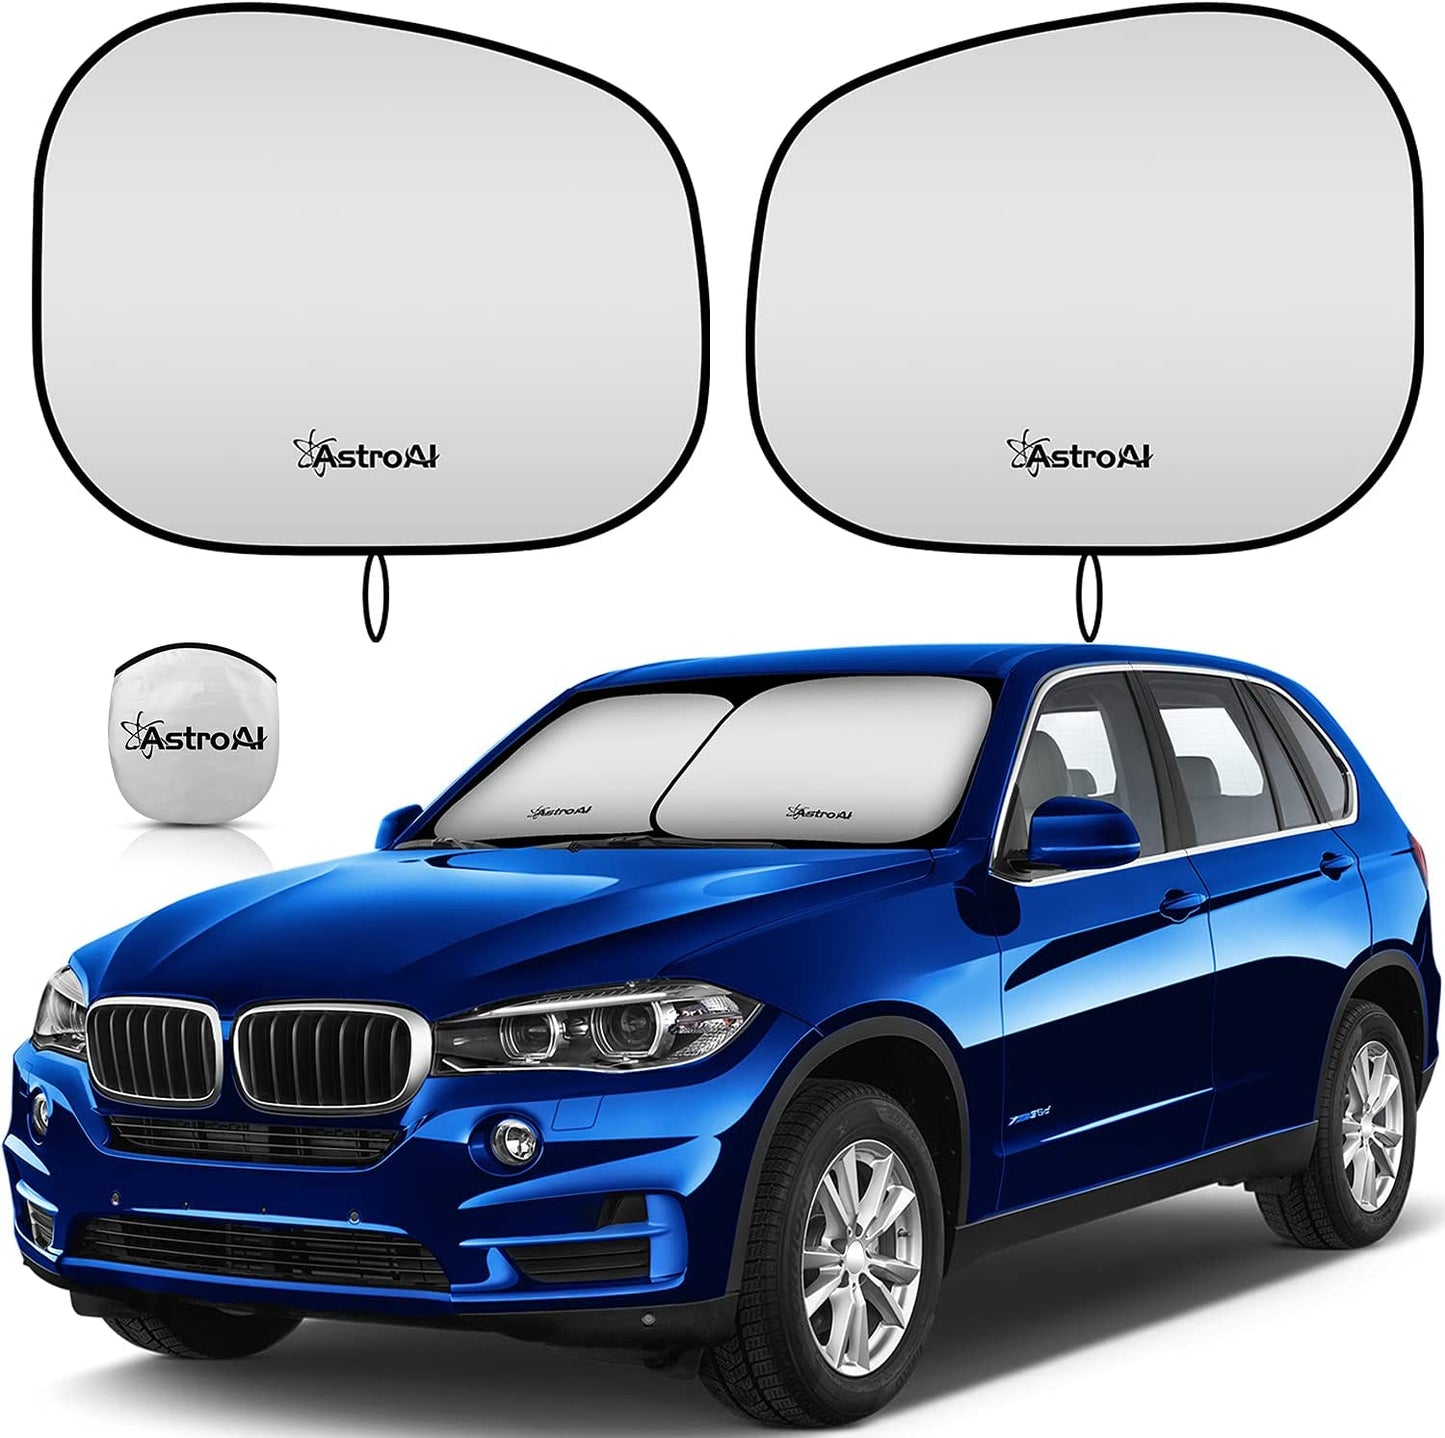 Car Sun Shade for Windshield -2 Piece Foldable Car Front Sunshield Blocks Max UV Rays, Titanium Silver Fabric Material, for Most Sedans SUV Truck(Medium Size 28 x 30.7 inches)